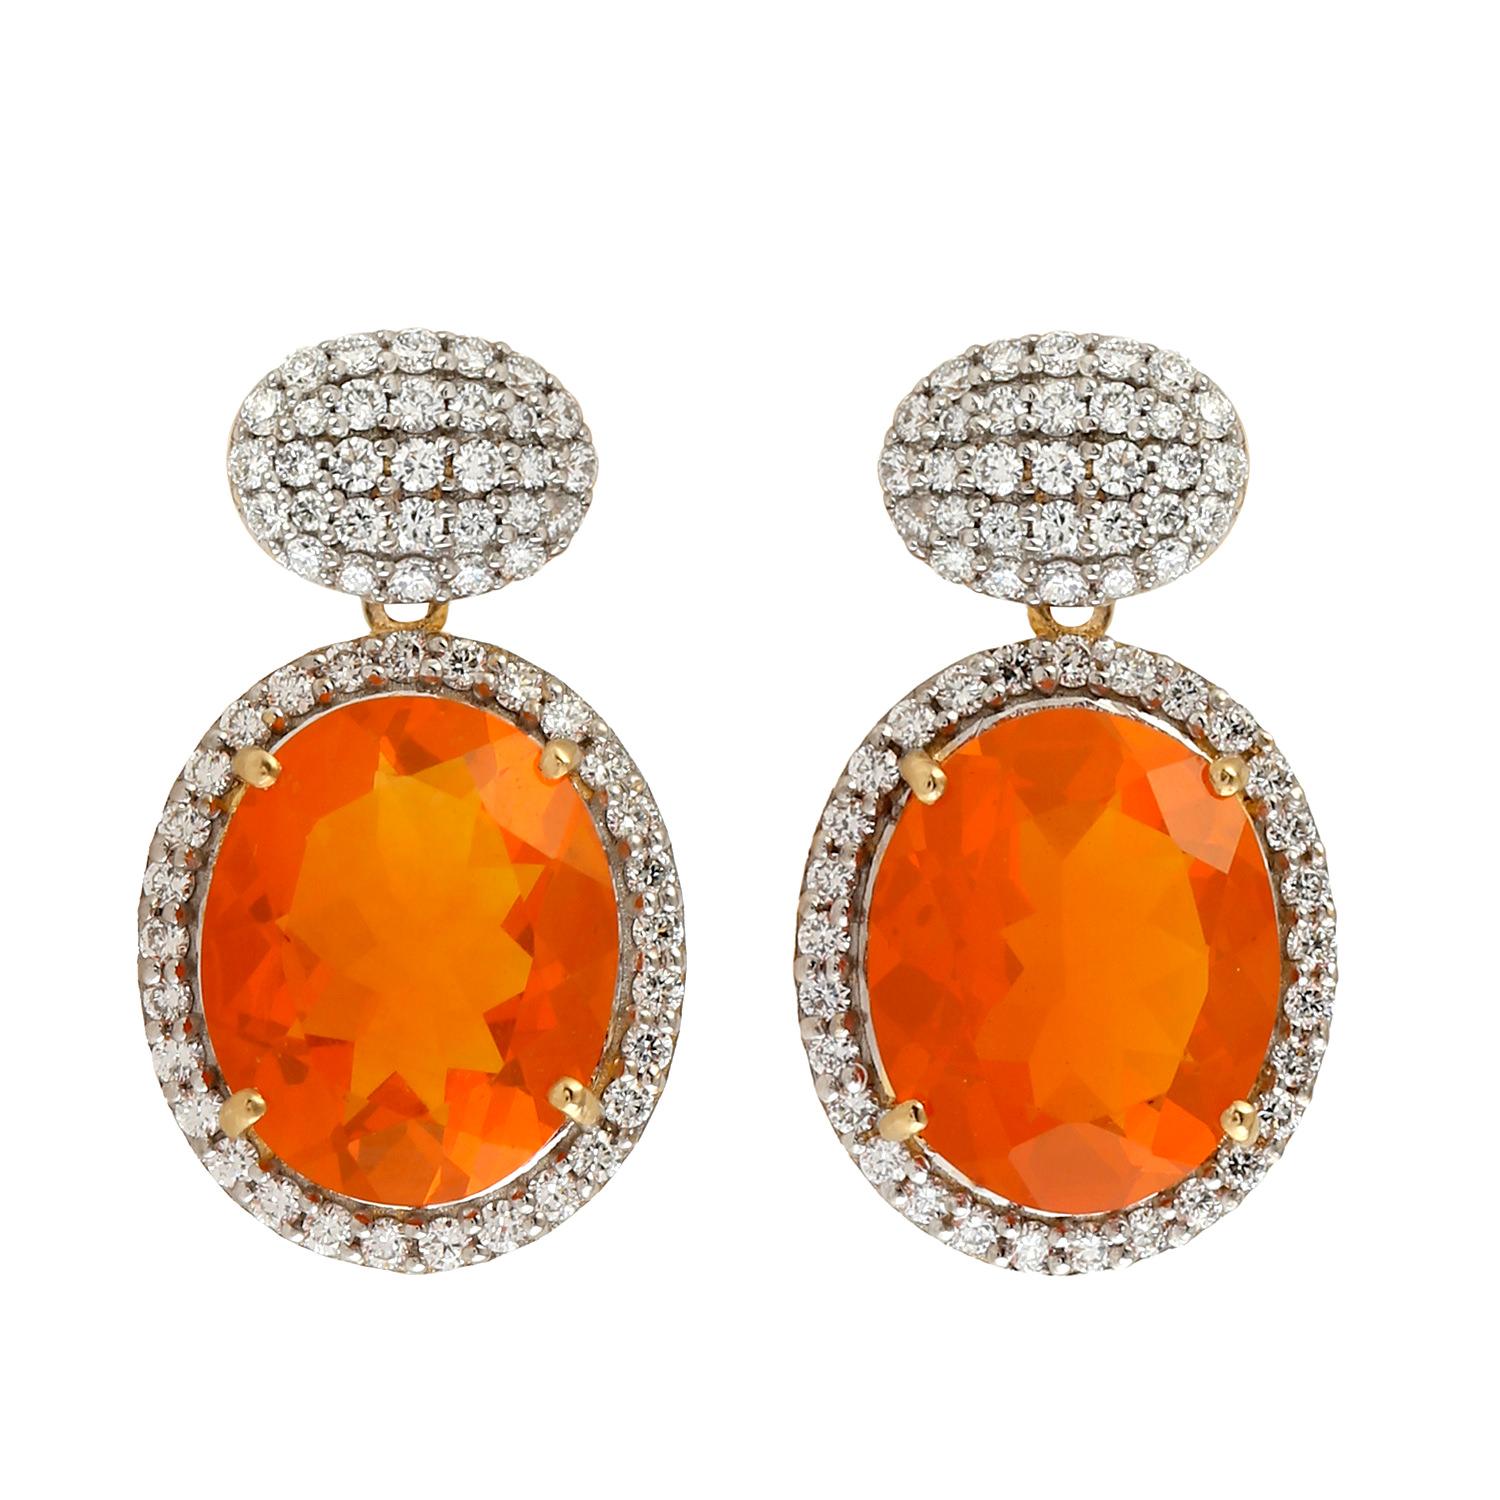 Natural Fire Opal And Diamond Drop Earrings 18K Yellow Gold In Excellent Condition For Sale In Laguna Niguel, CA